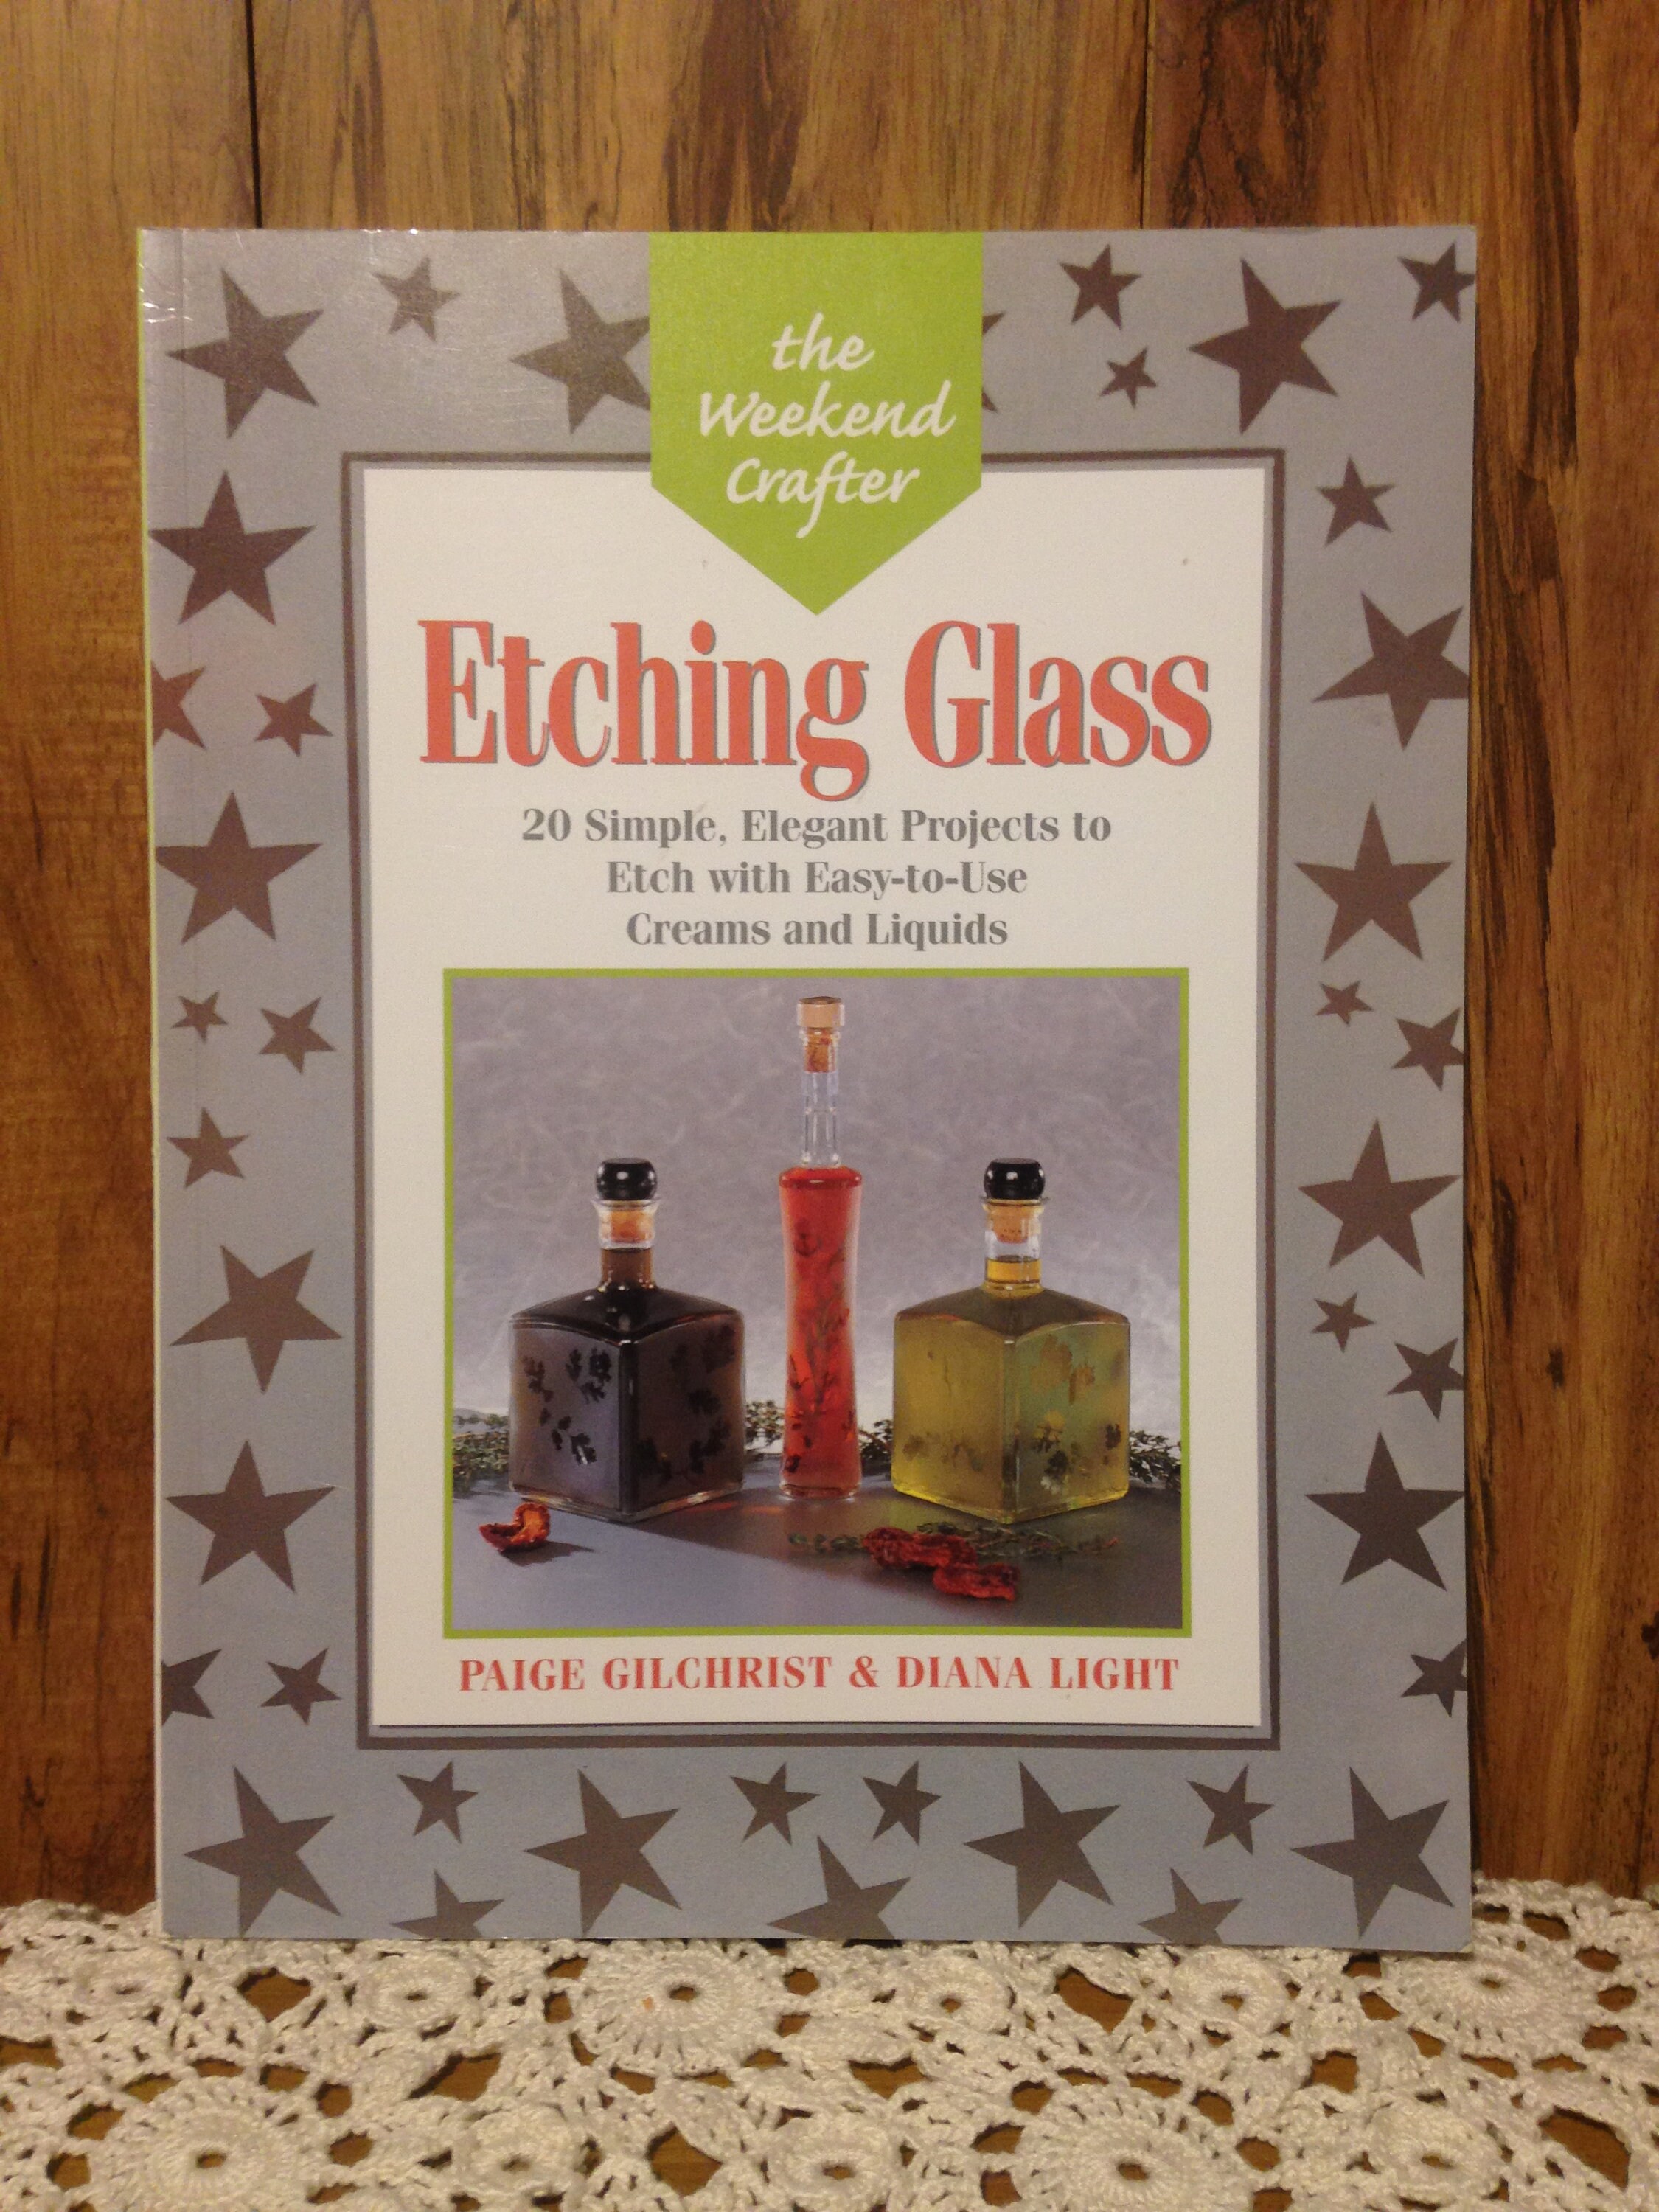 Glass Etching Cream by Armour Etch With Free How to Ebook & Patterns 